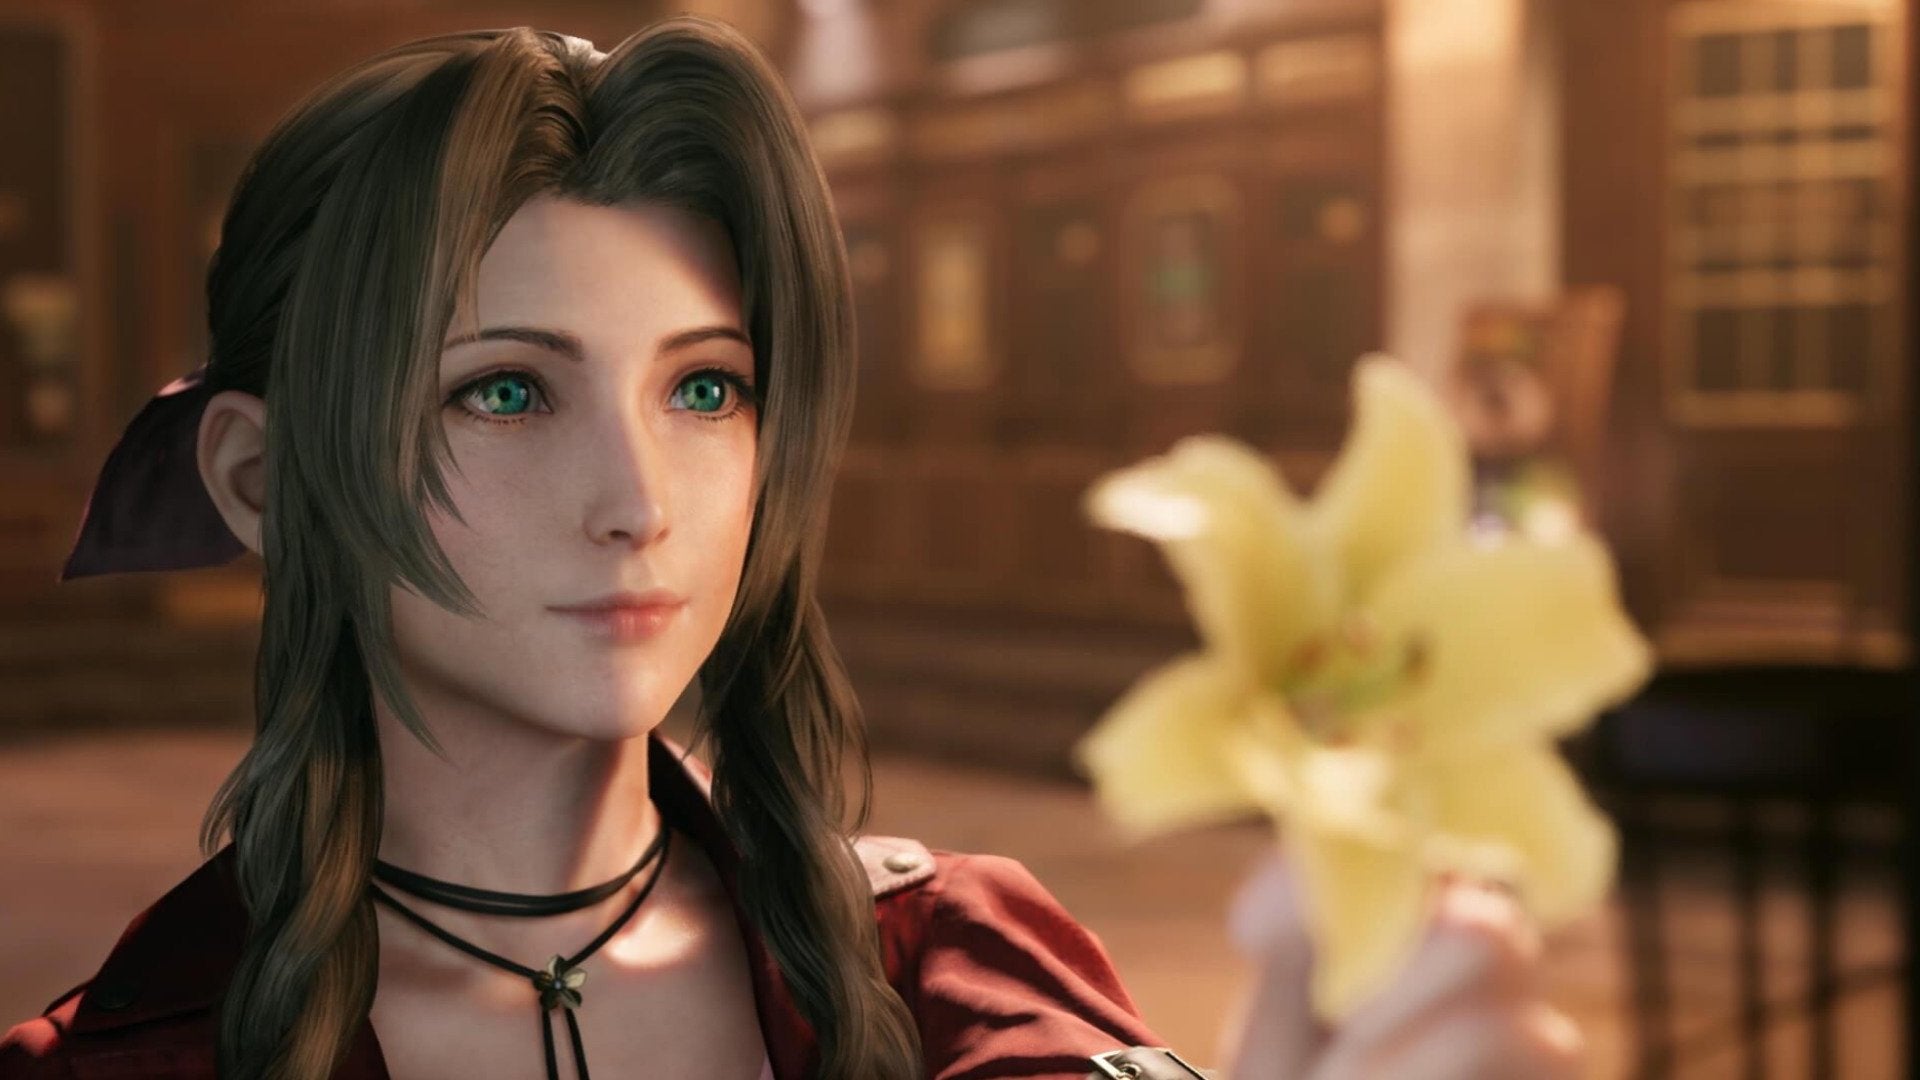 Aerith handing Cloud a yellow flower in Final Fantasy VII: Remake.